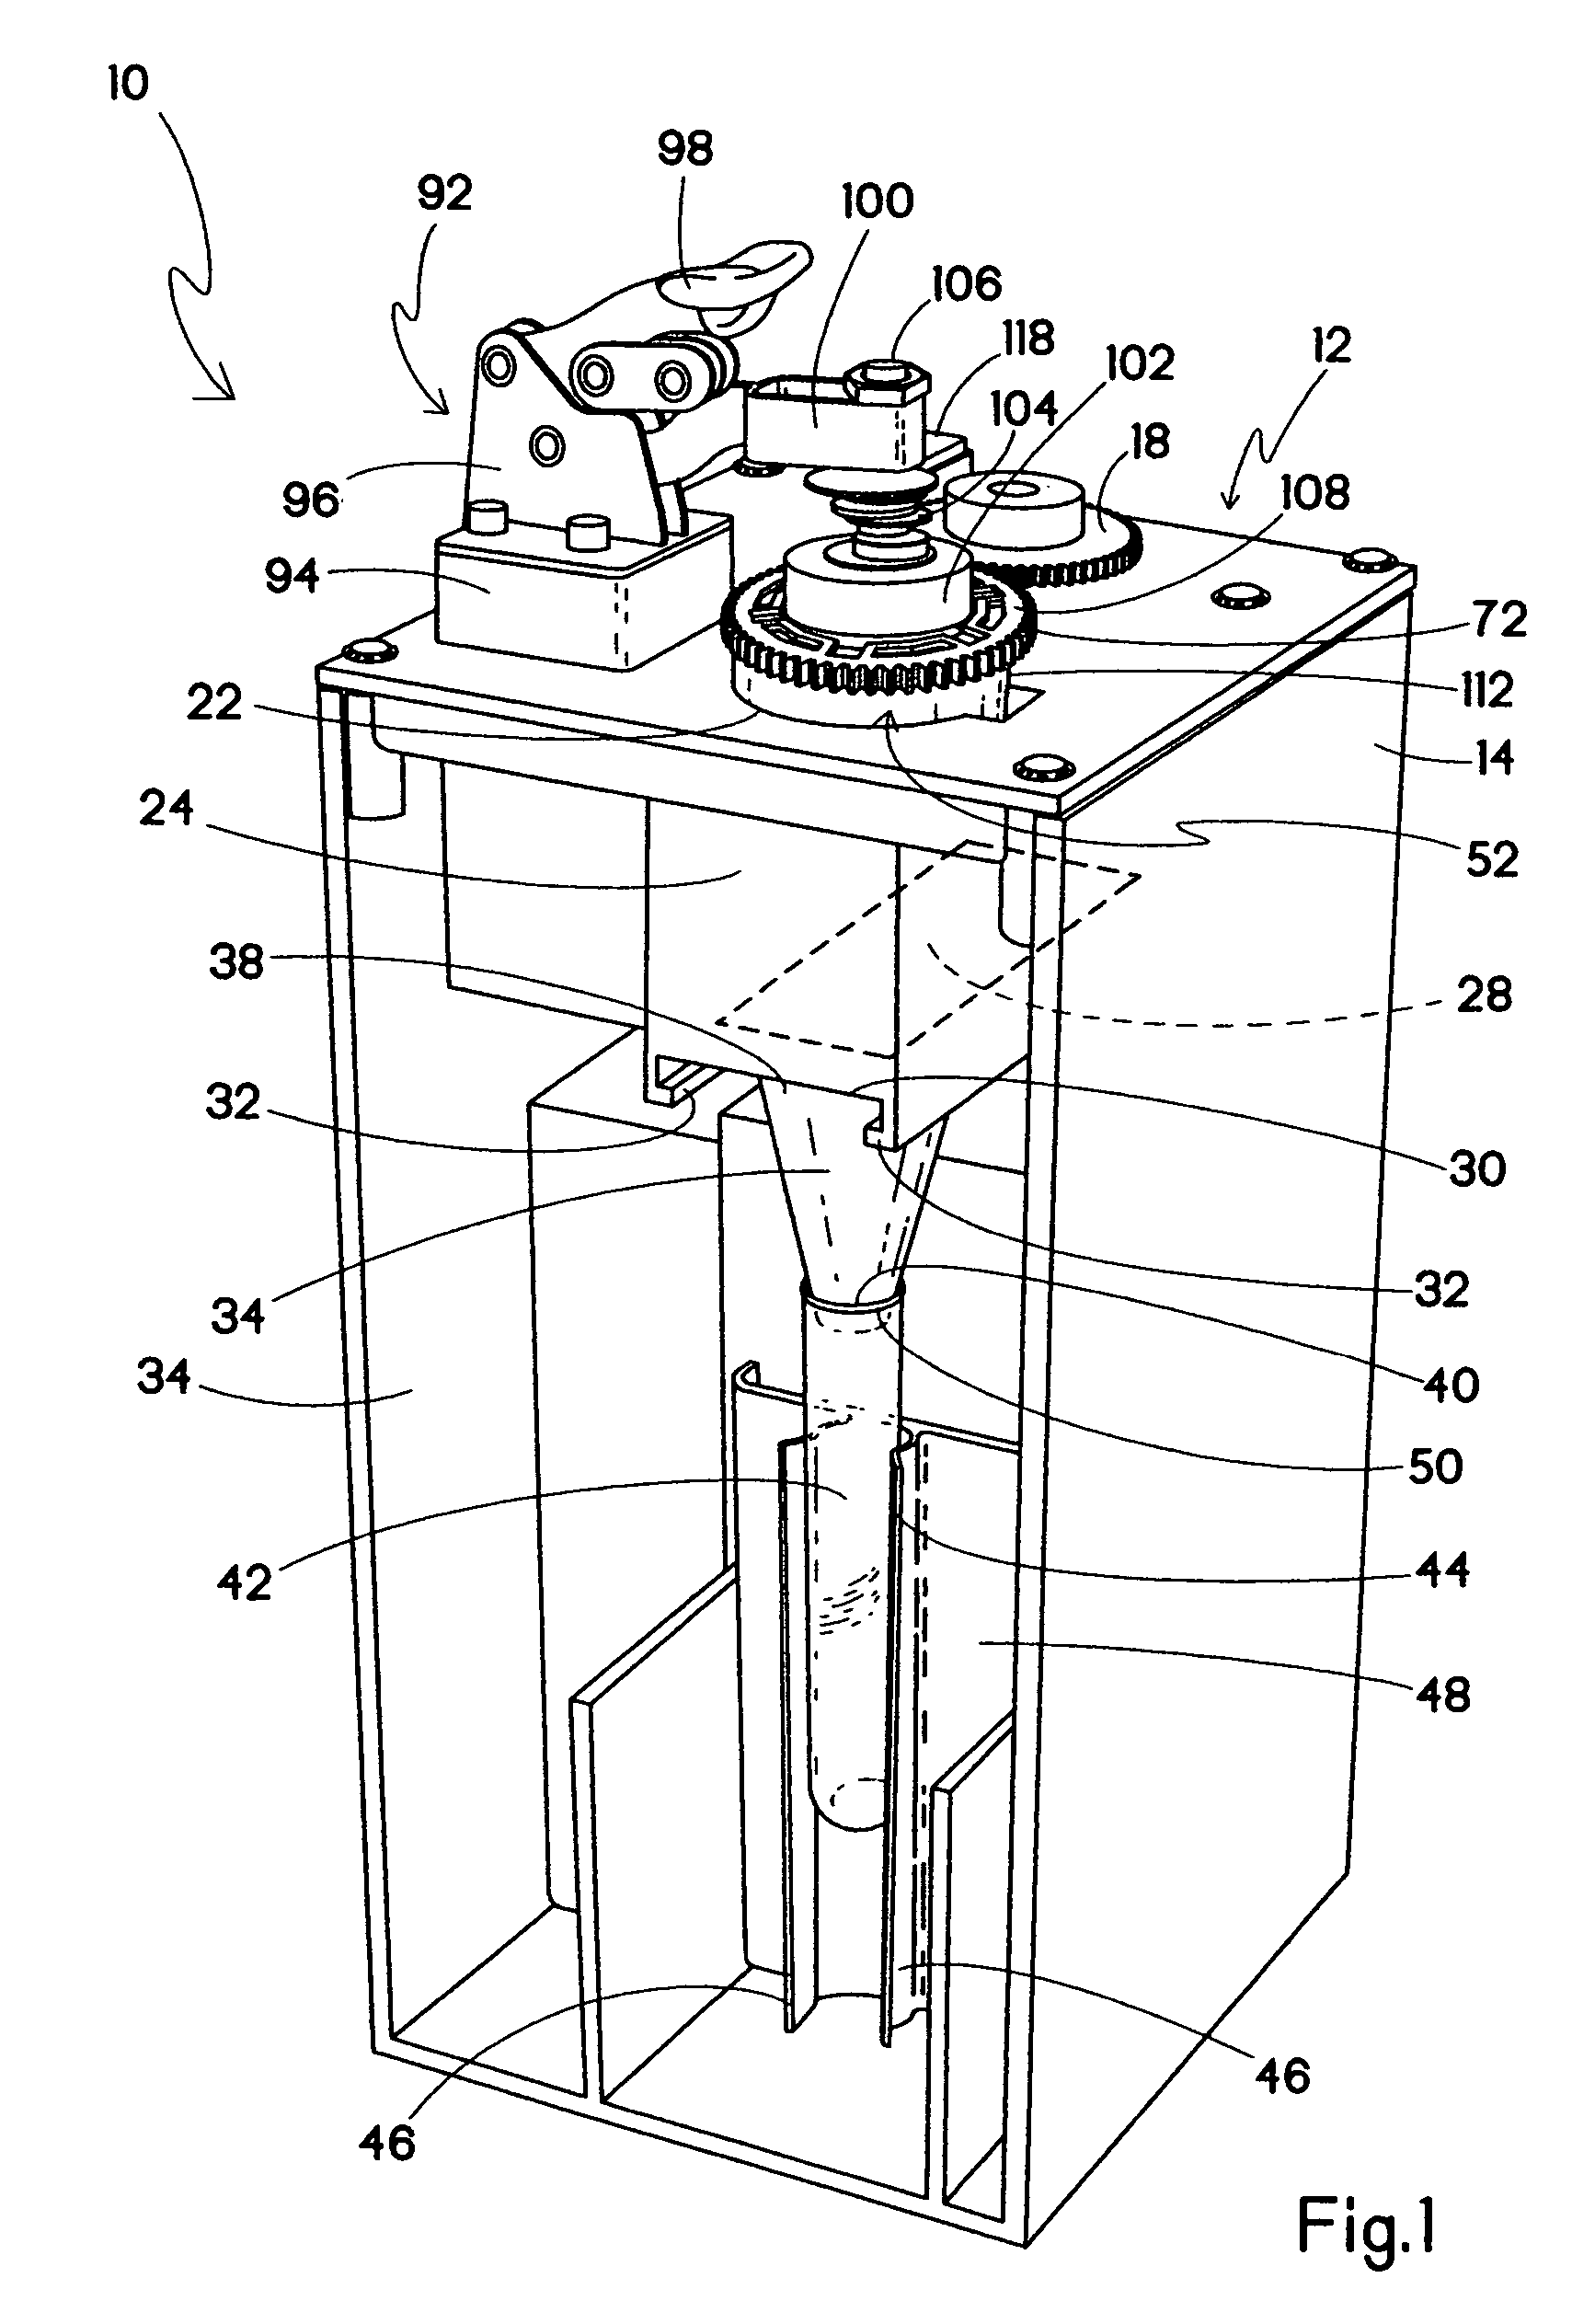 Method and apparatus for comminution of biological specimens